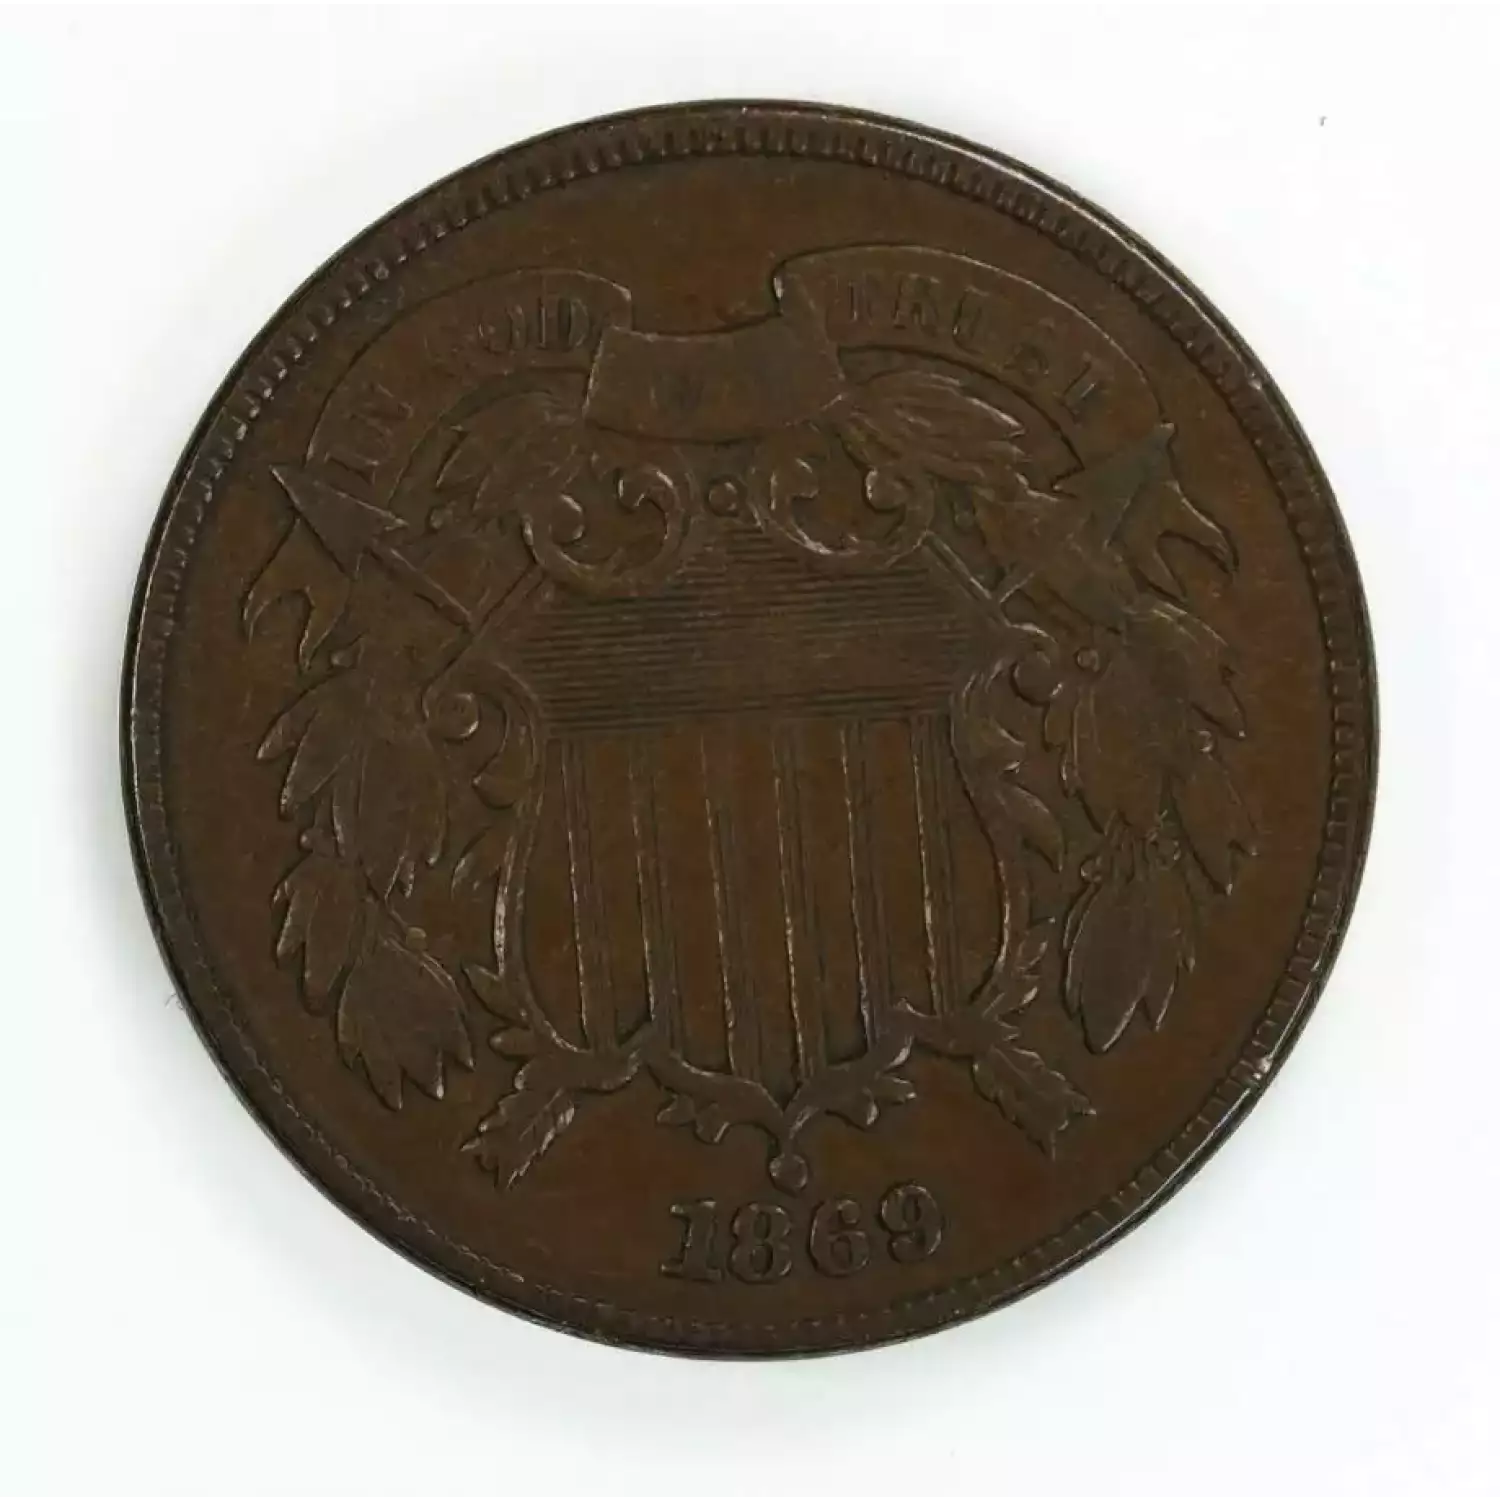 Two cent pieces-Two cent pieces 1864-73 -Copper